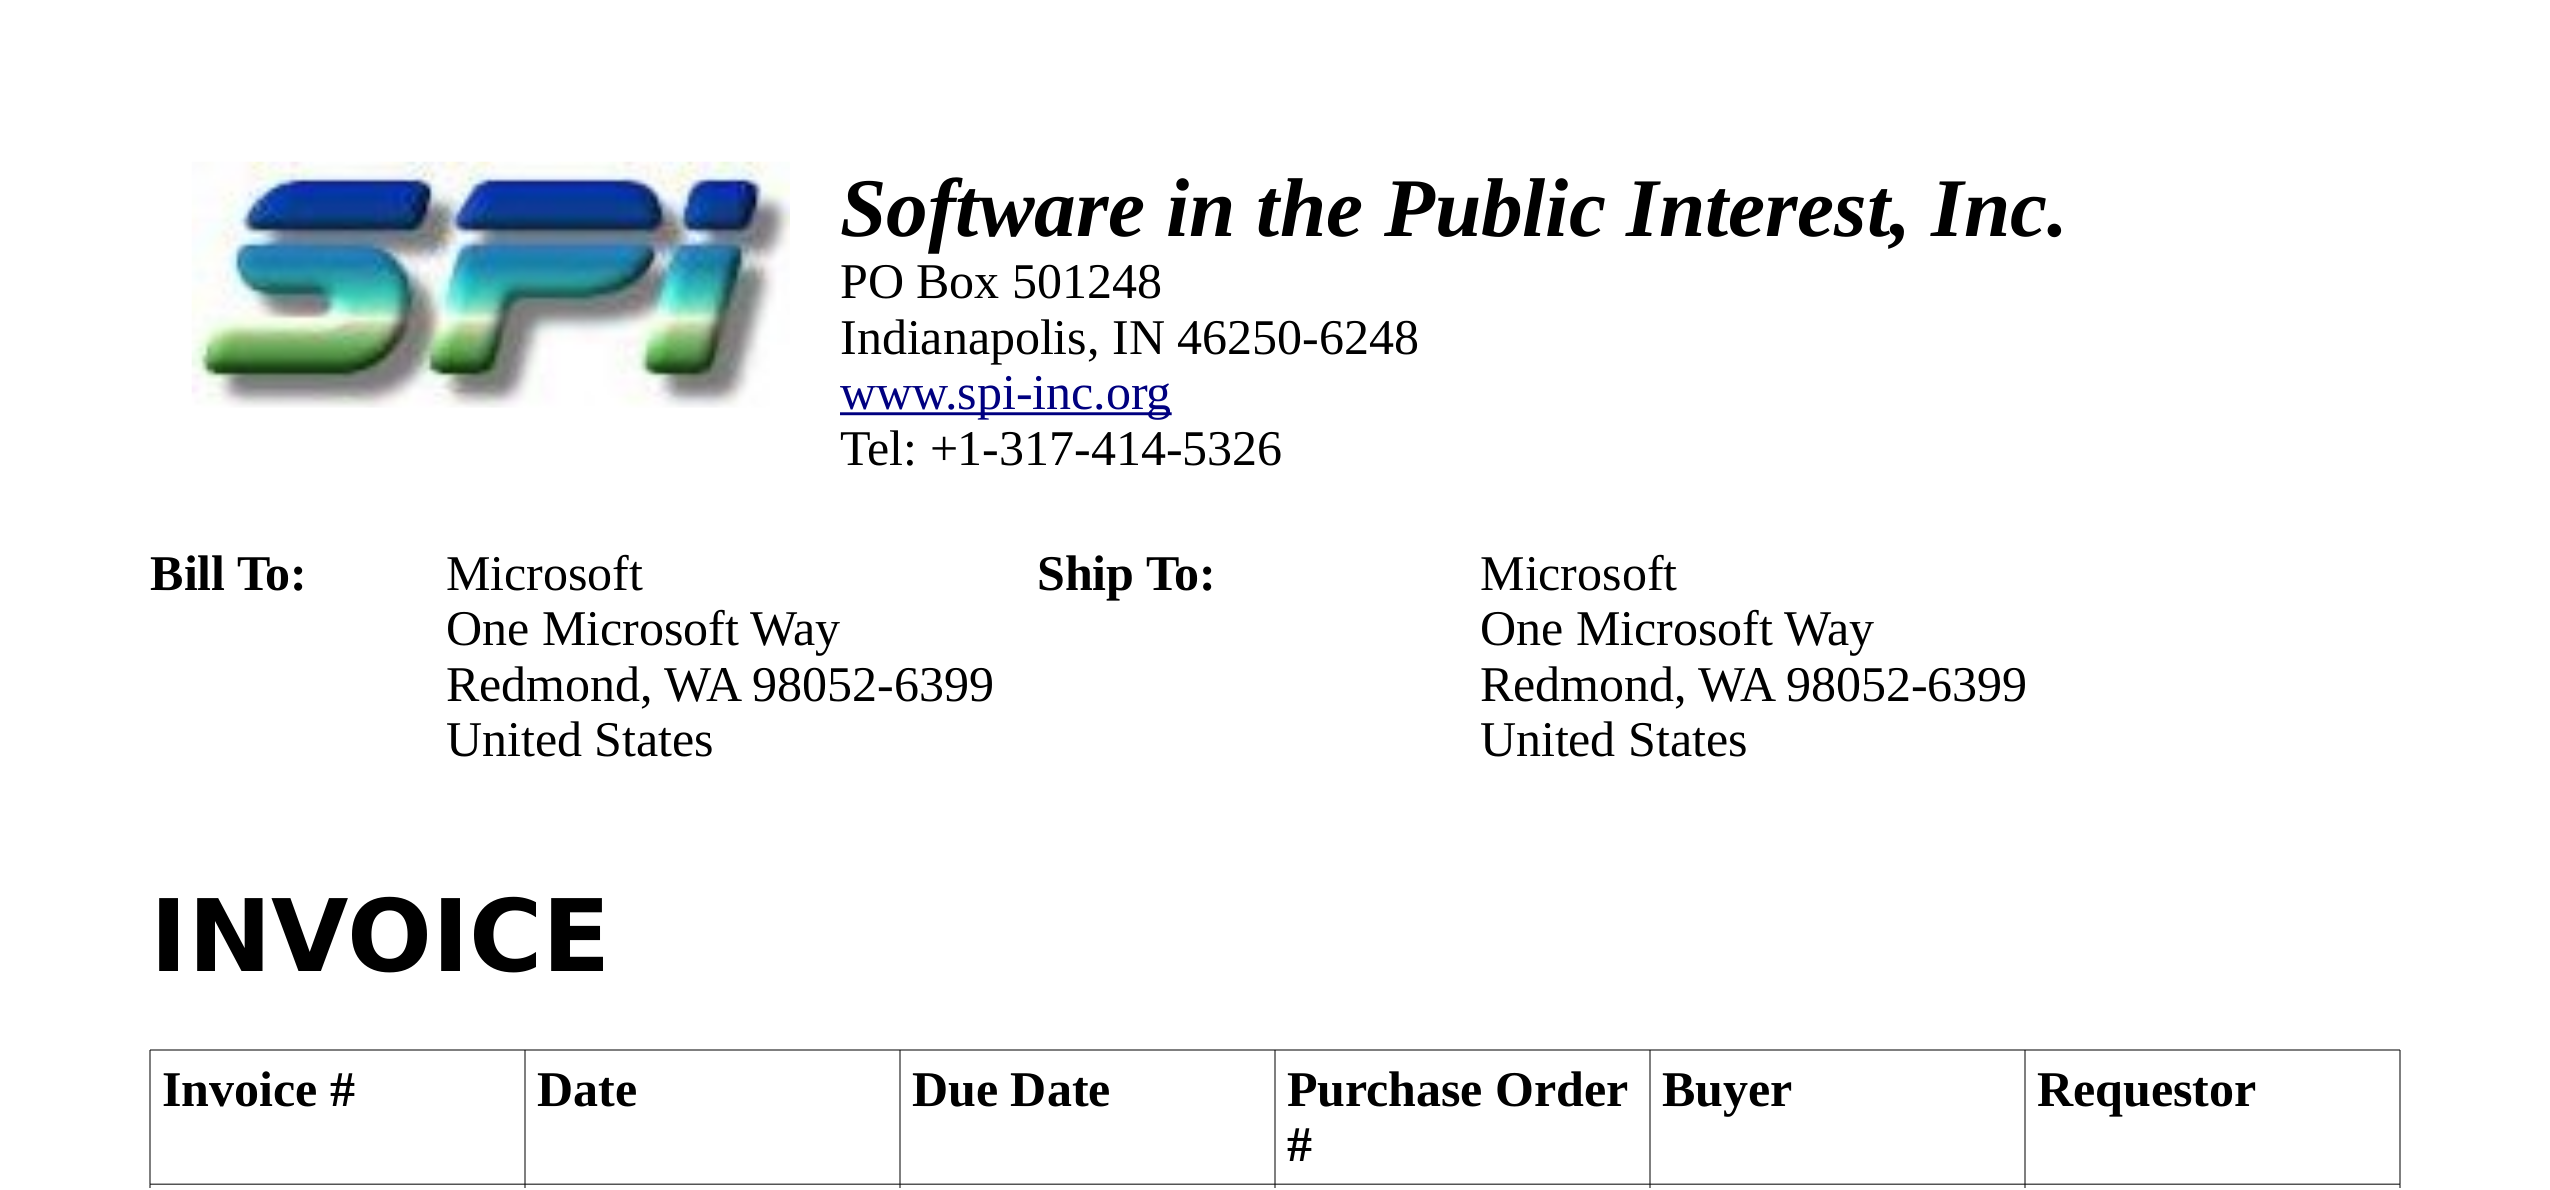 SPI, Inc now invoices Microsoft for donations